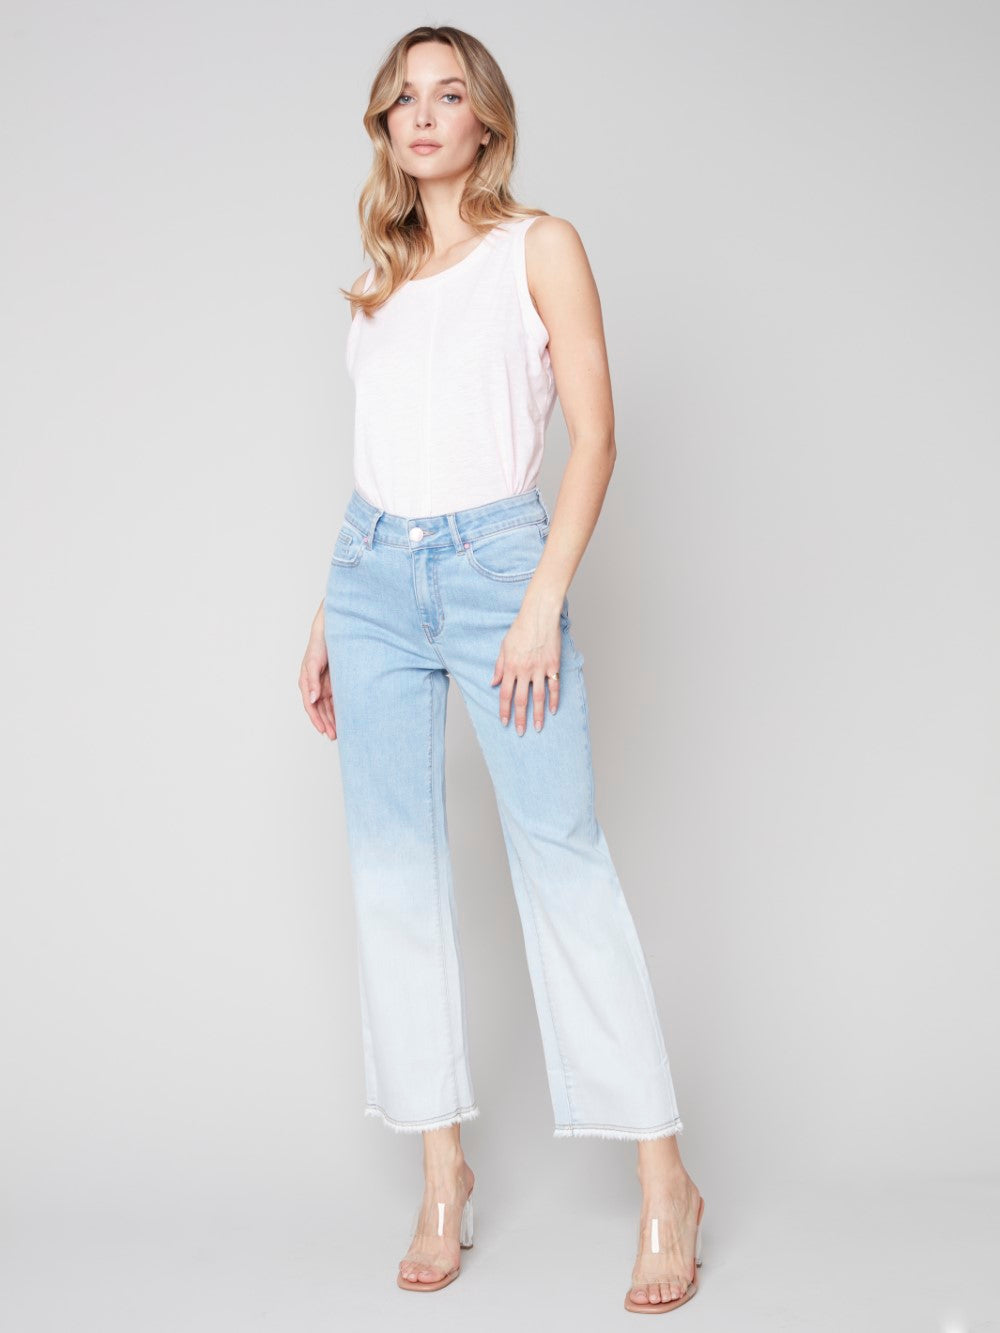 Charlie B. Jeans C5324O-566B-P372 Ombre